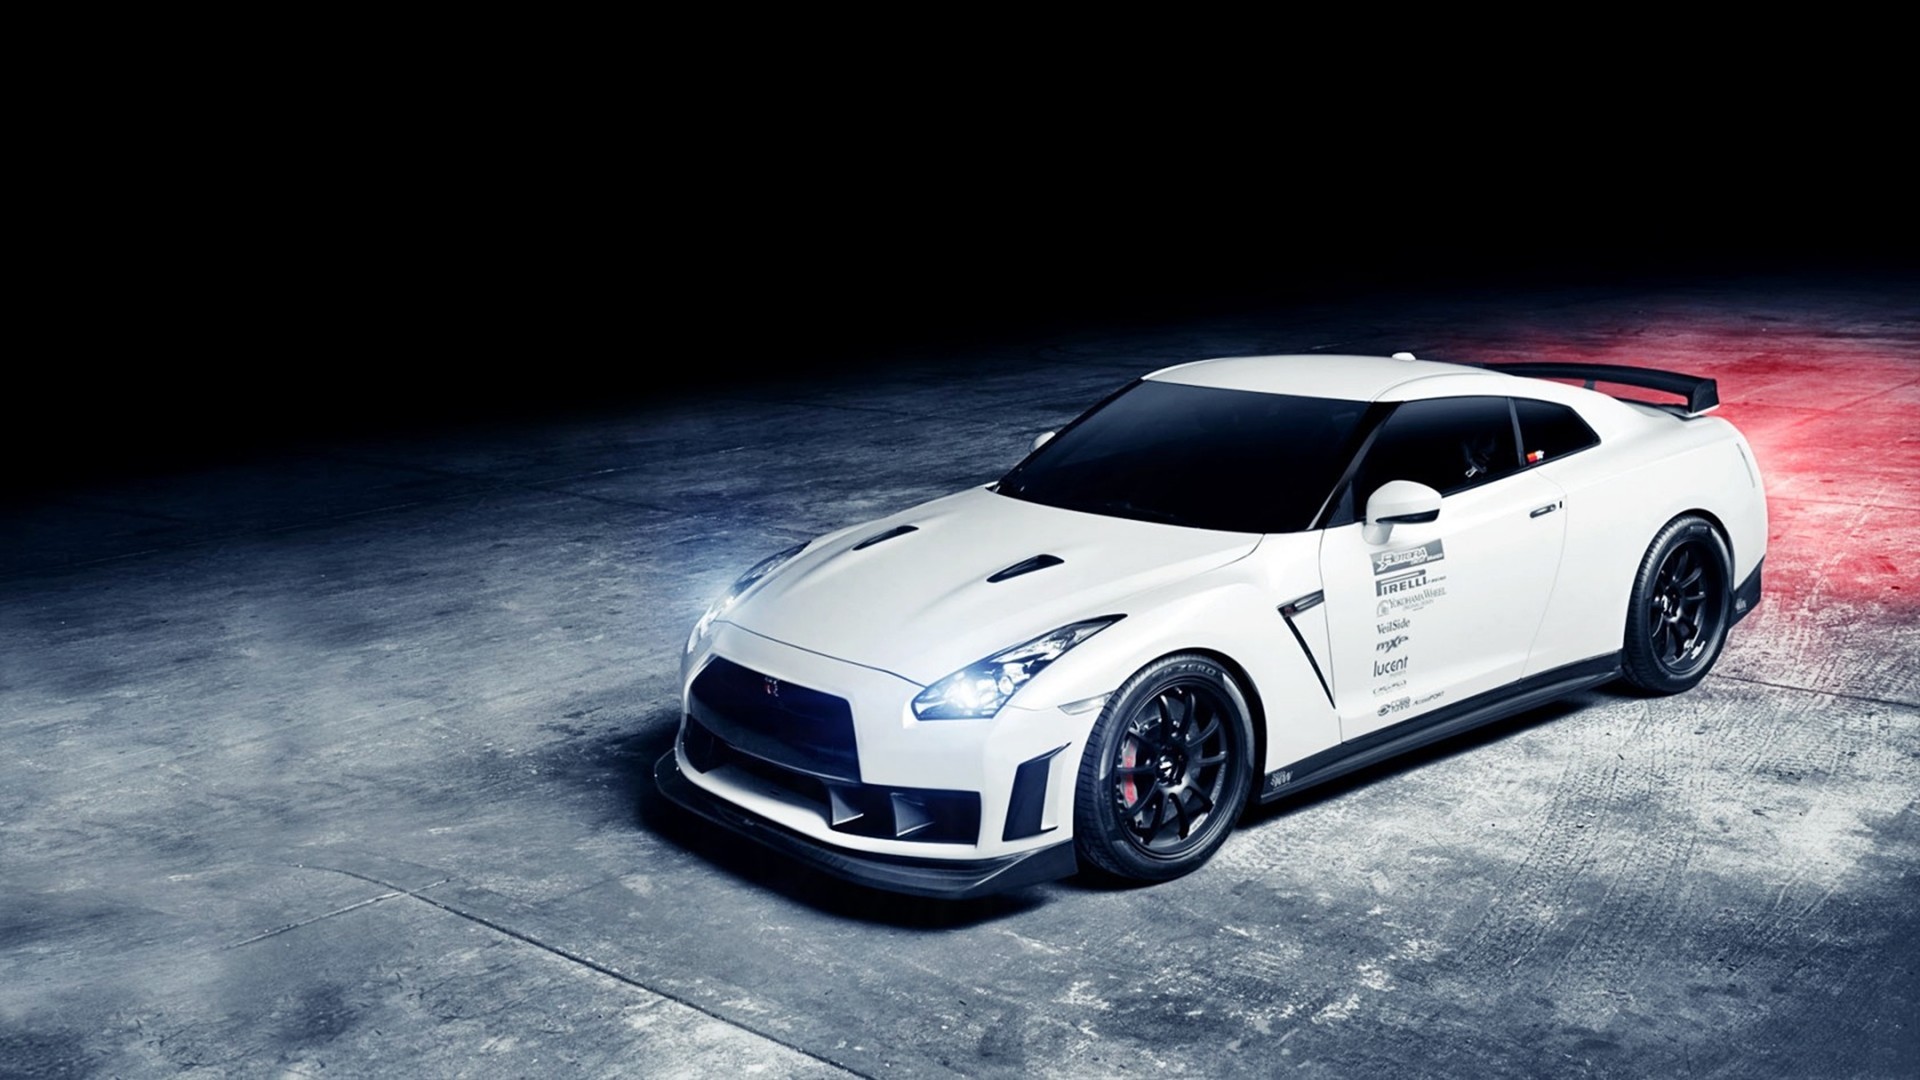 1920x1080 Skyline R35 HD Wallpapers 1080p Cars Cars Background Wallpapers HD 